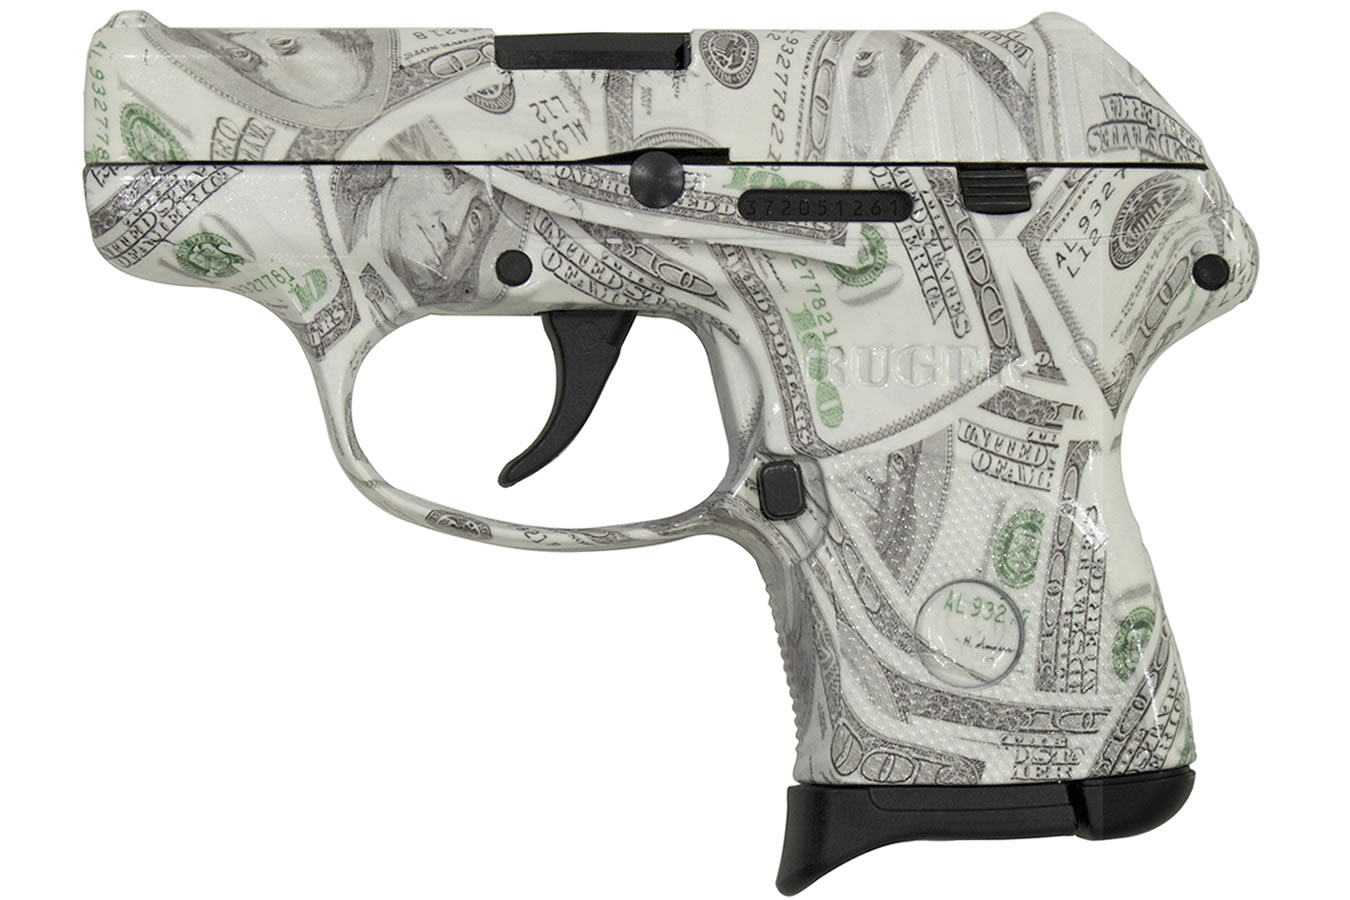 RUGER LCP 380 ACP HUNDRED DOLLAR BILL GLOWING